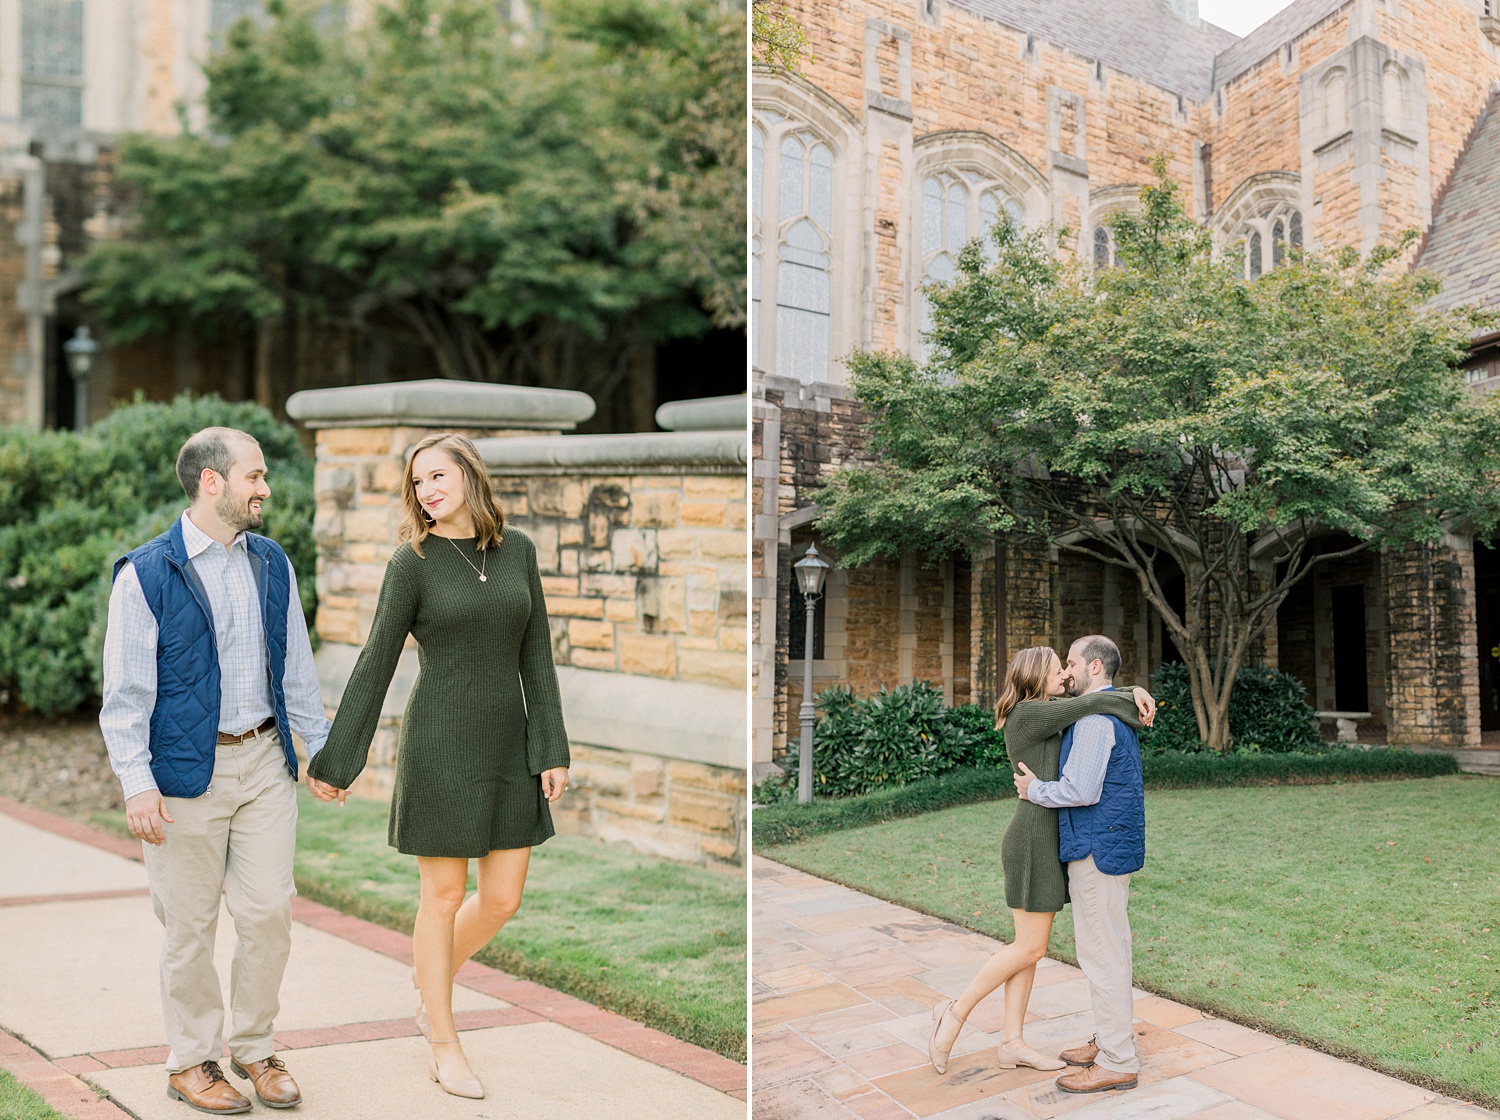 Downtown Birmingham engagement photos in casual outfits